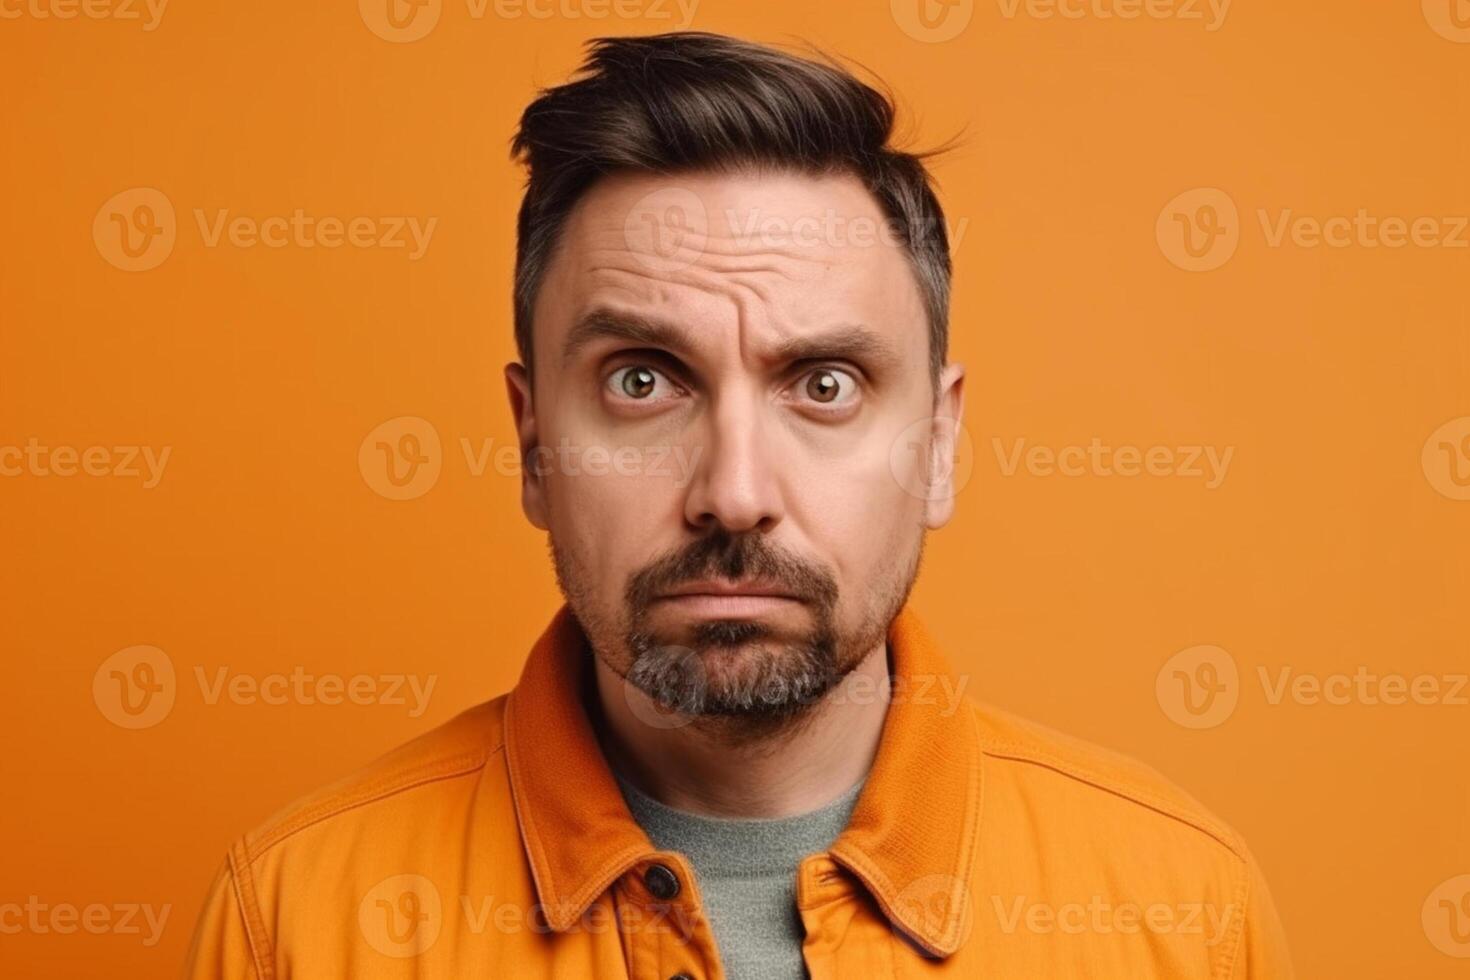 a man on solid color background photoshoot with Disgust face experession photo